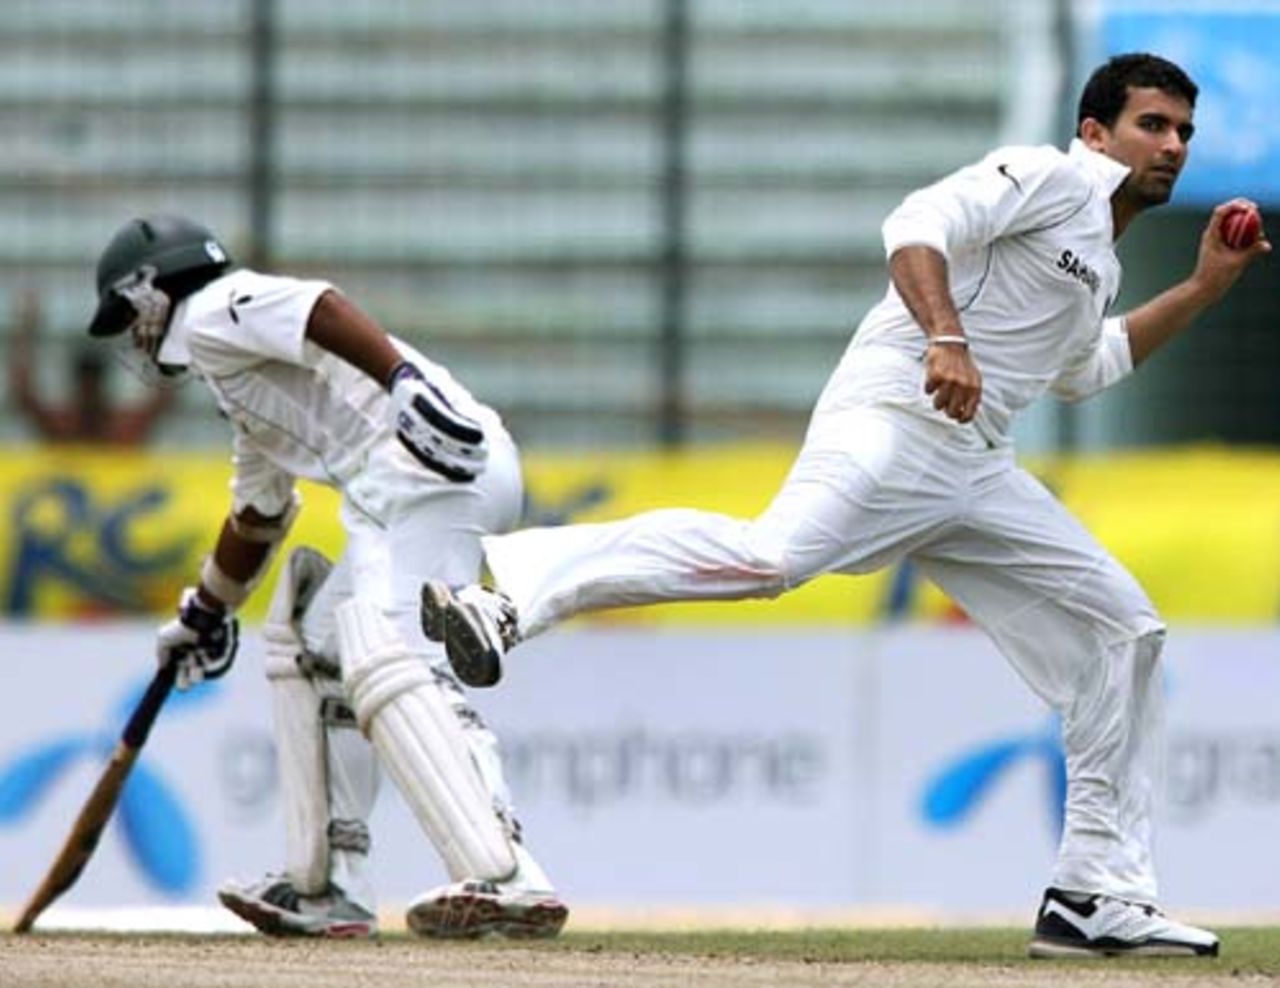 Zaheer Khan fields the ball off his own bowling, Bangladesh v India, 2nd Test, 3rd day, Mirpur, May 27, 2007